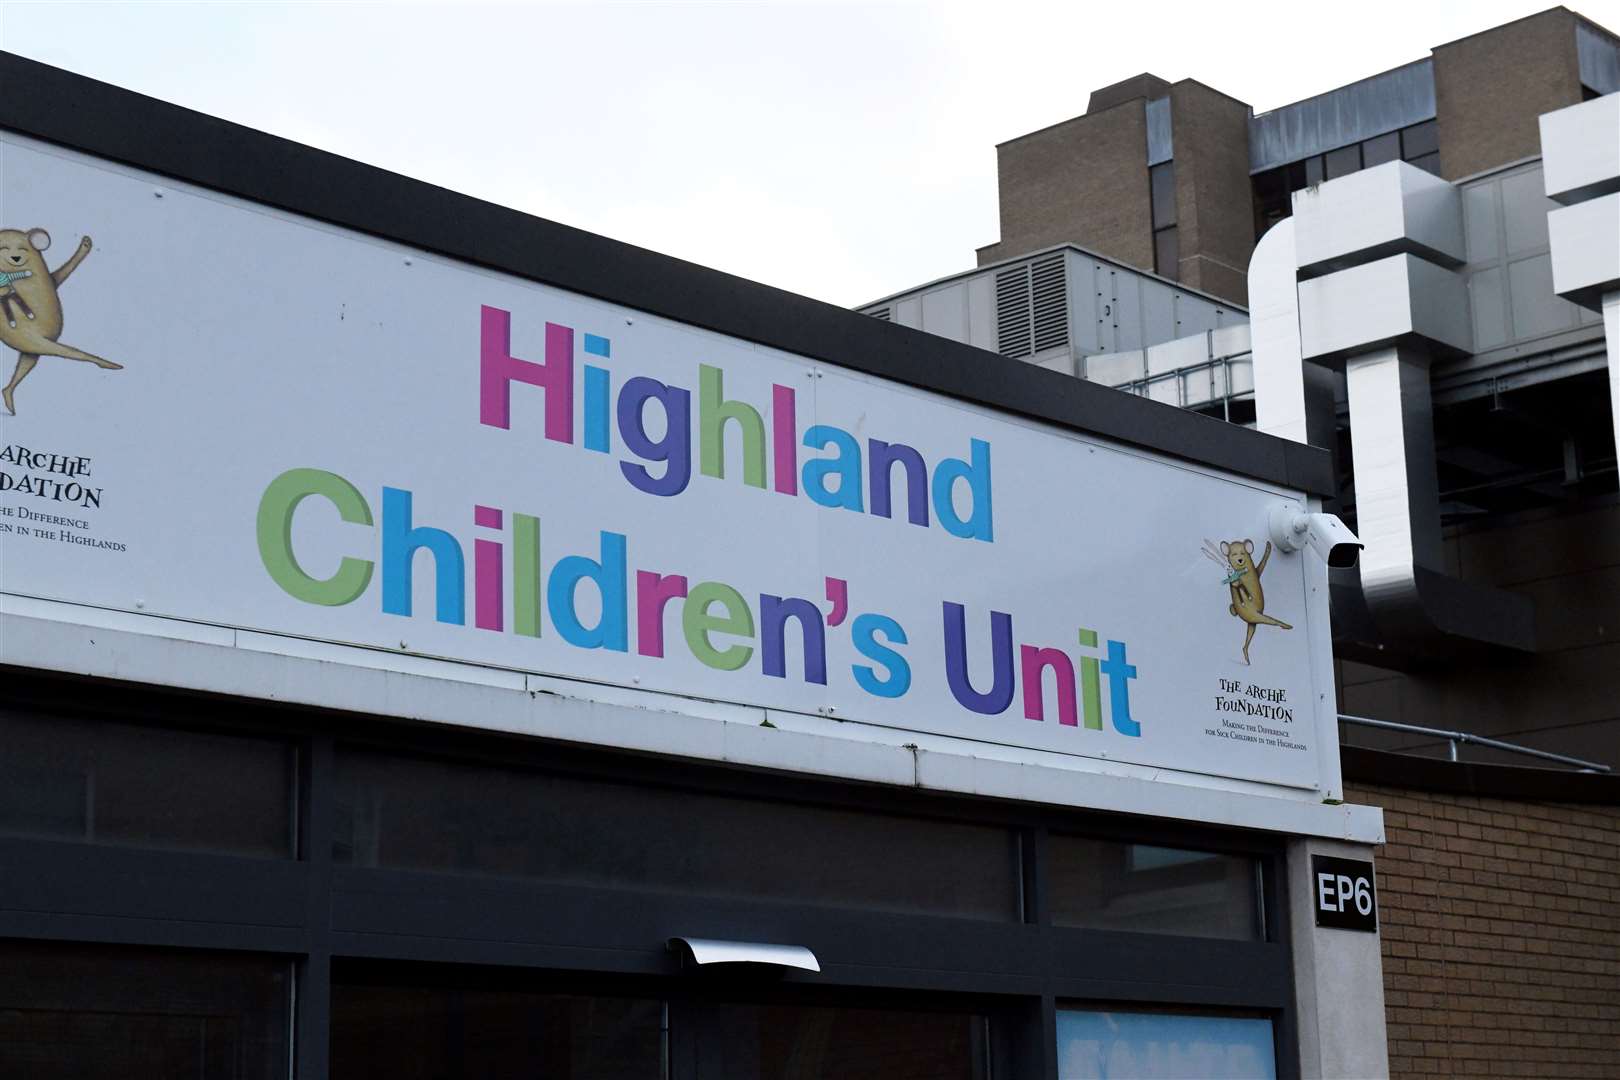 The Highland Children's Unit at Raigmore Hospital is supported by the Archie Foundation.